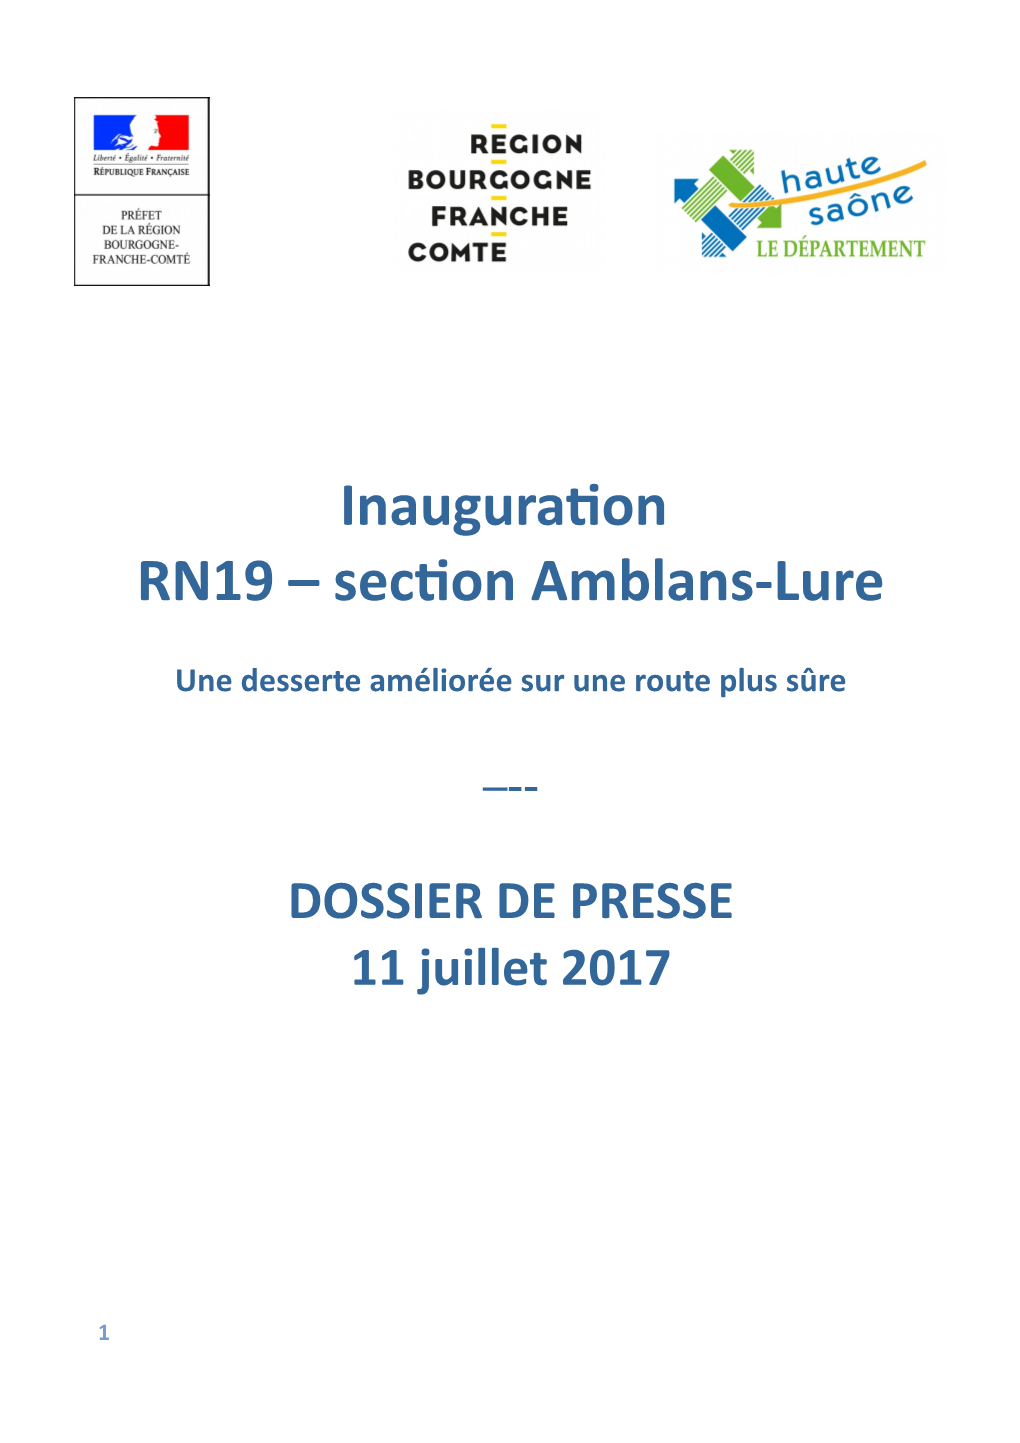 Inauguration RN19 – Section Amblans-Lure